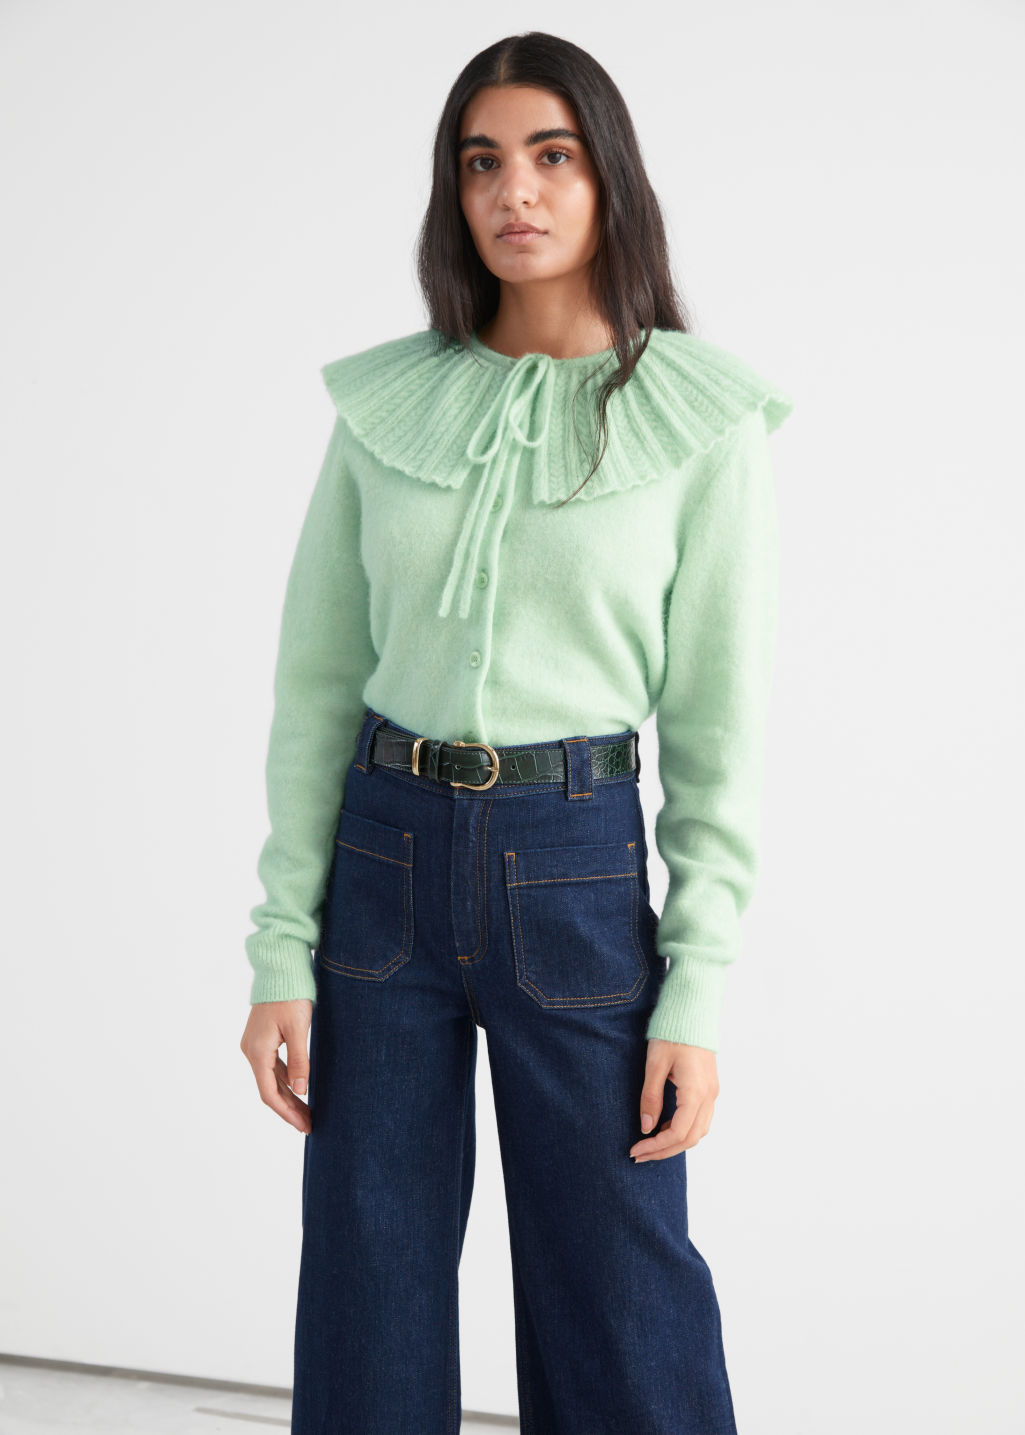 Statement Collar Knit Cardigan - Mint - Cardigans - & Other Stories